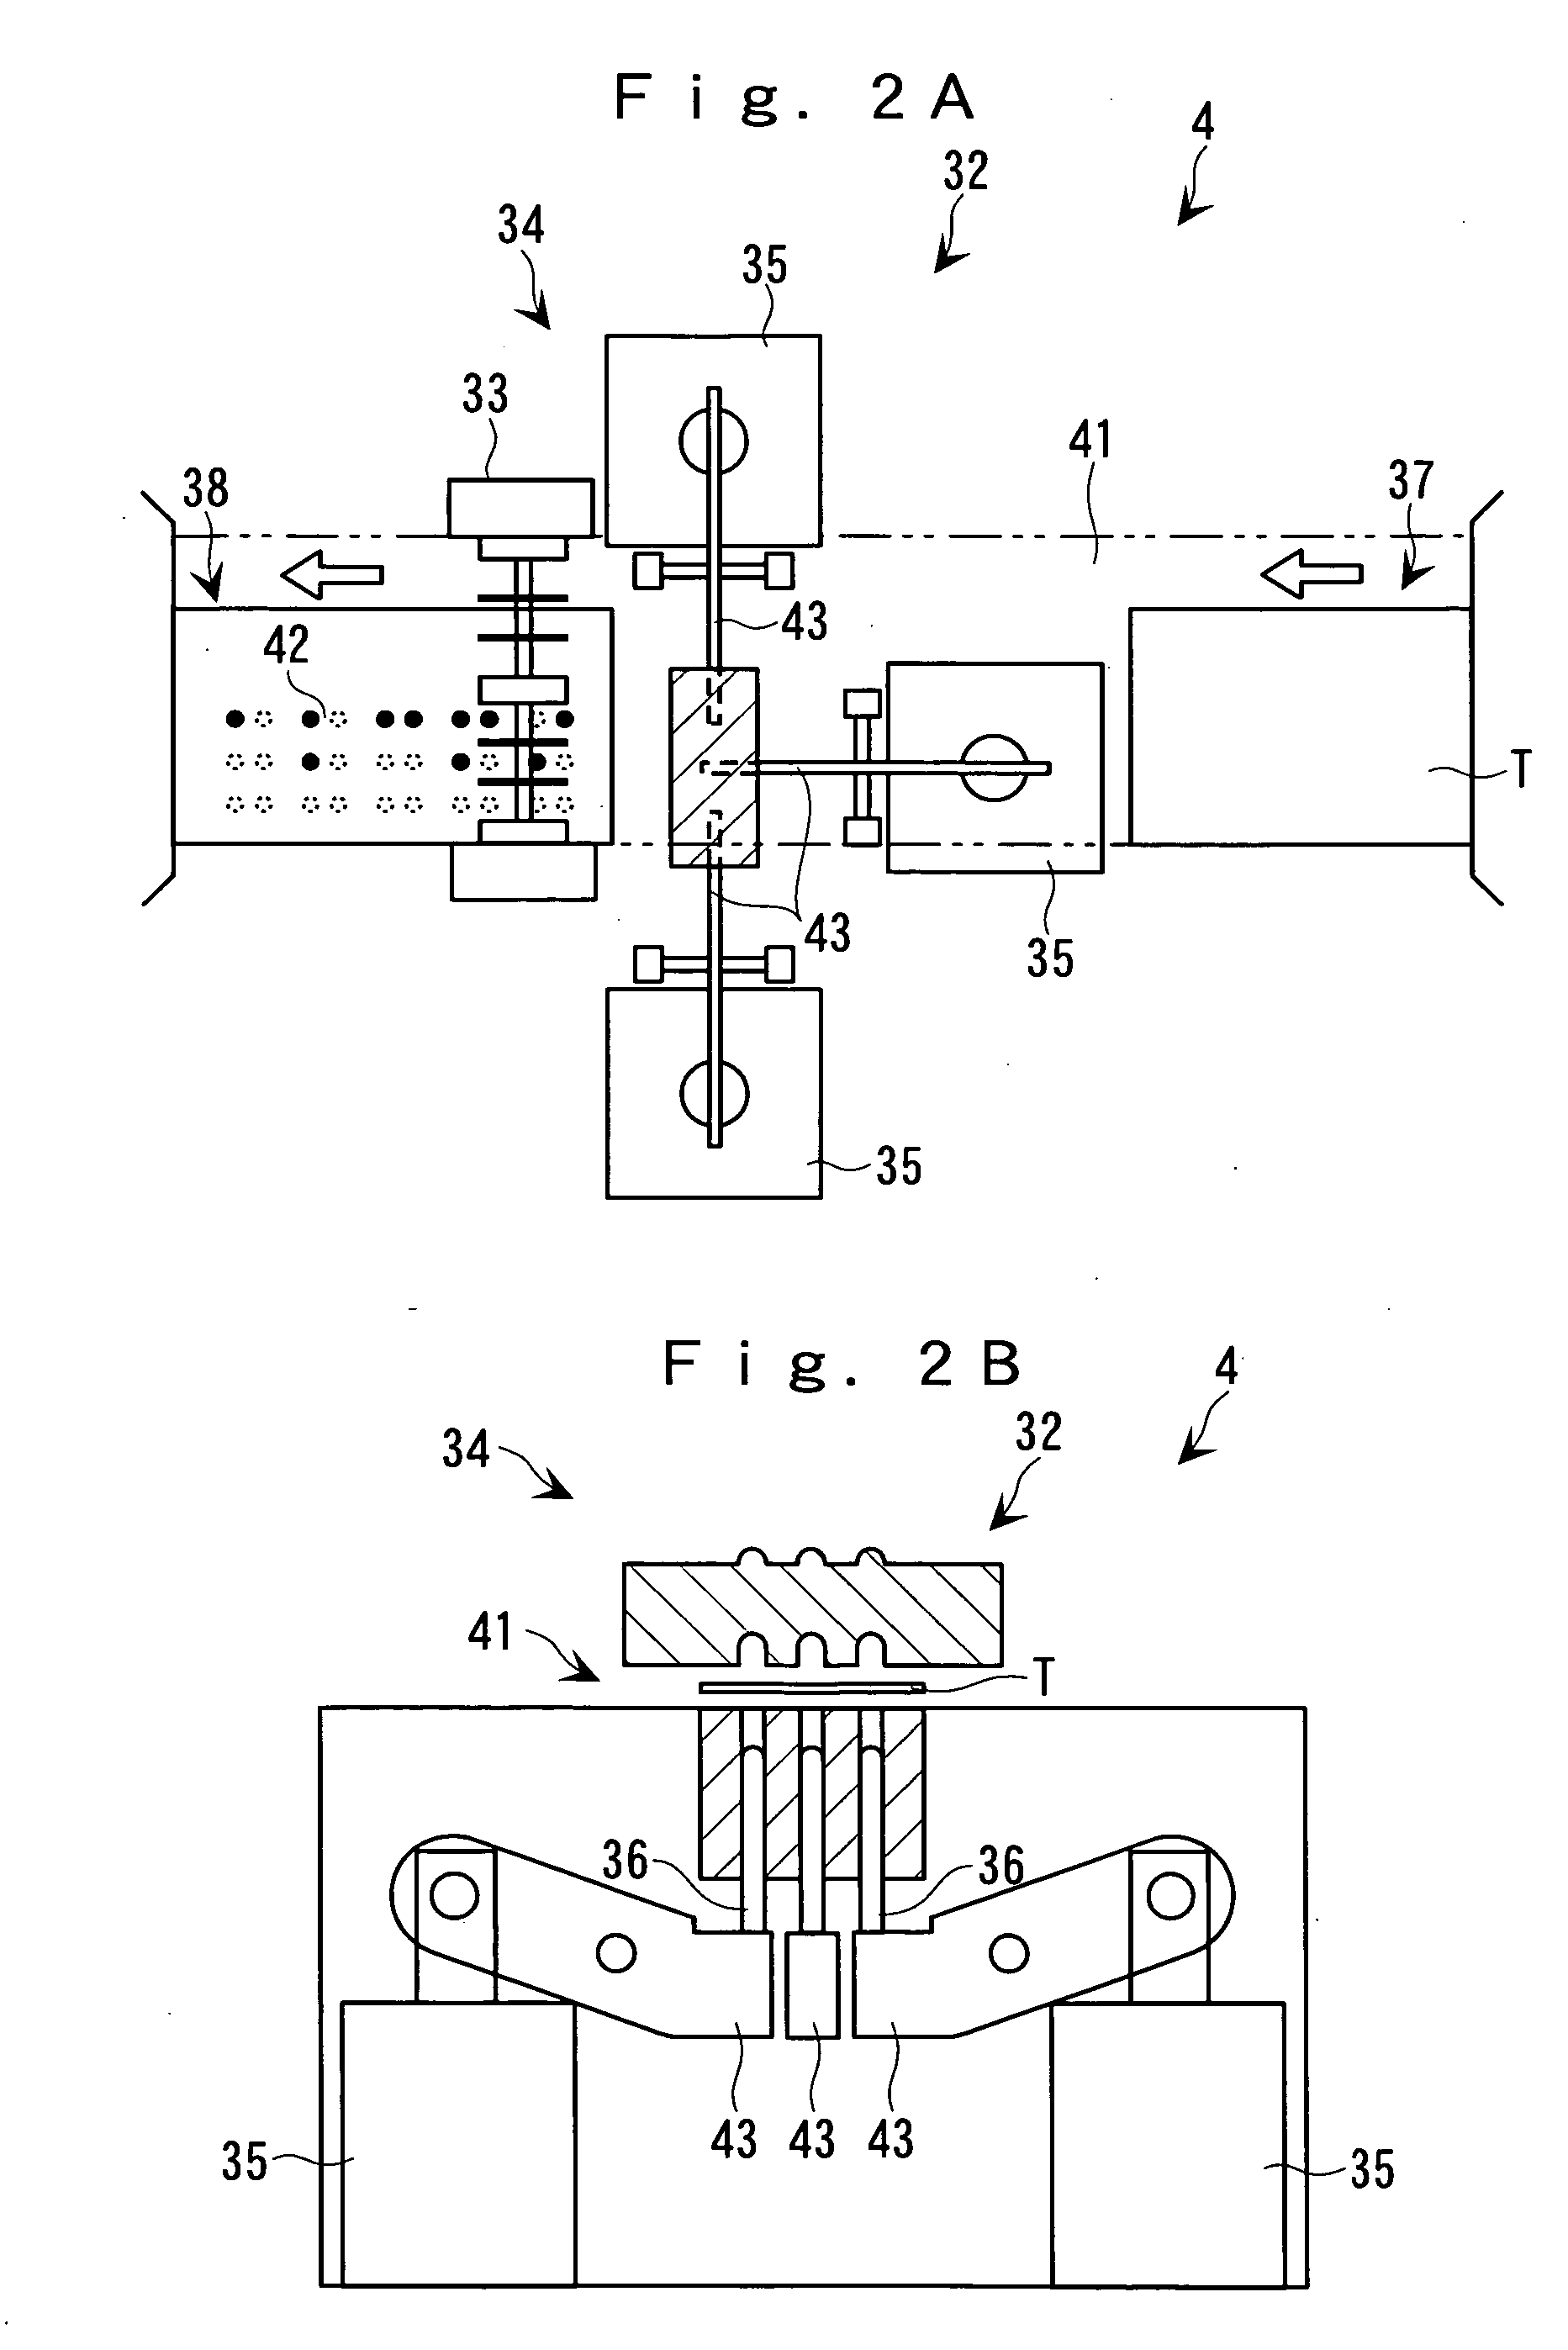 Method of, and apparatus for, processing tape